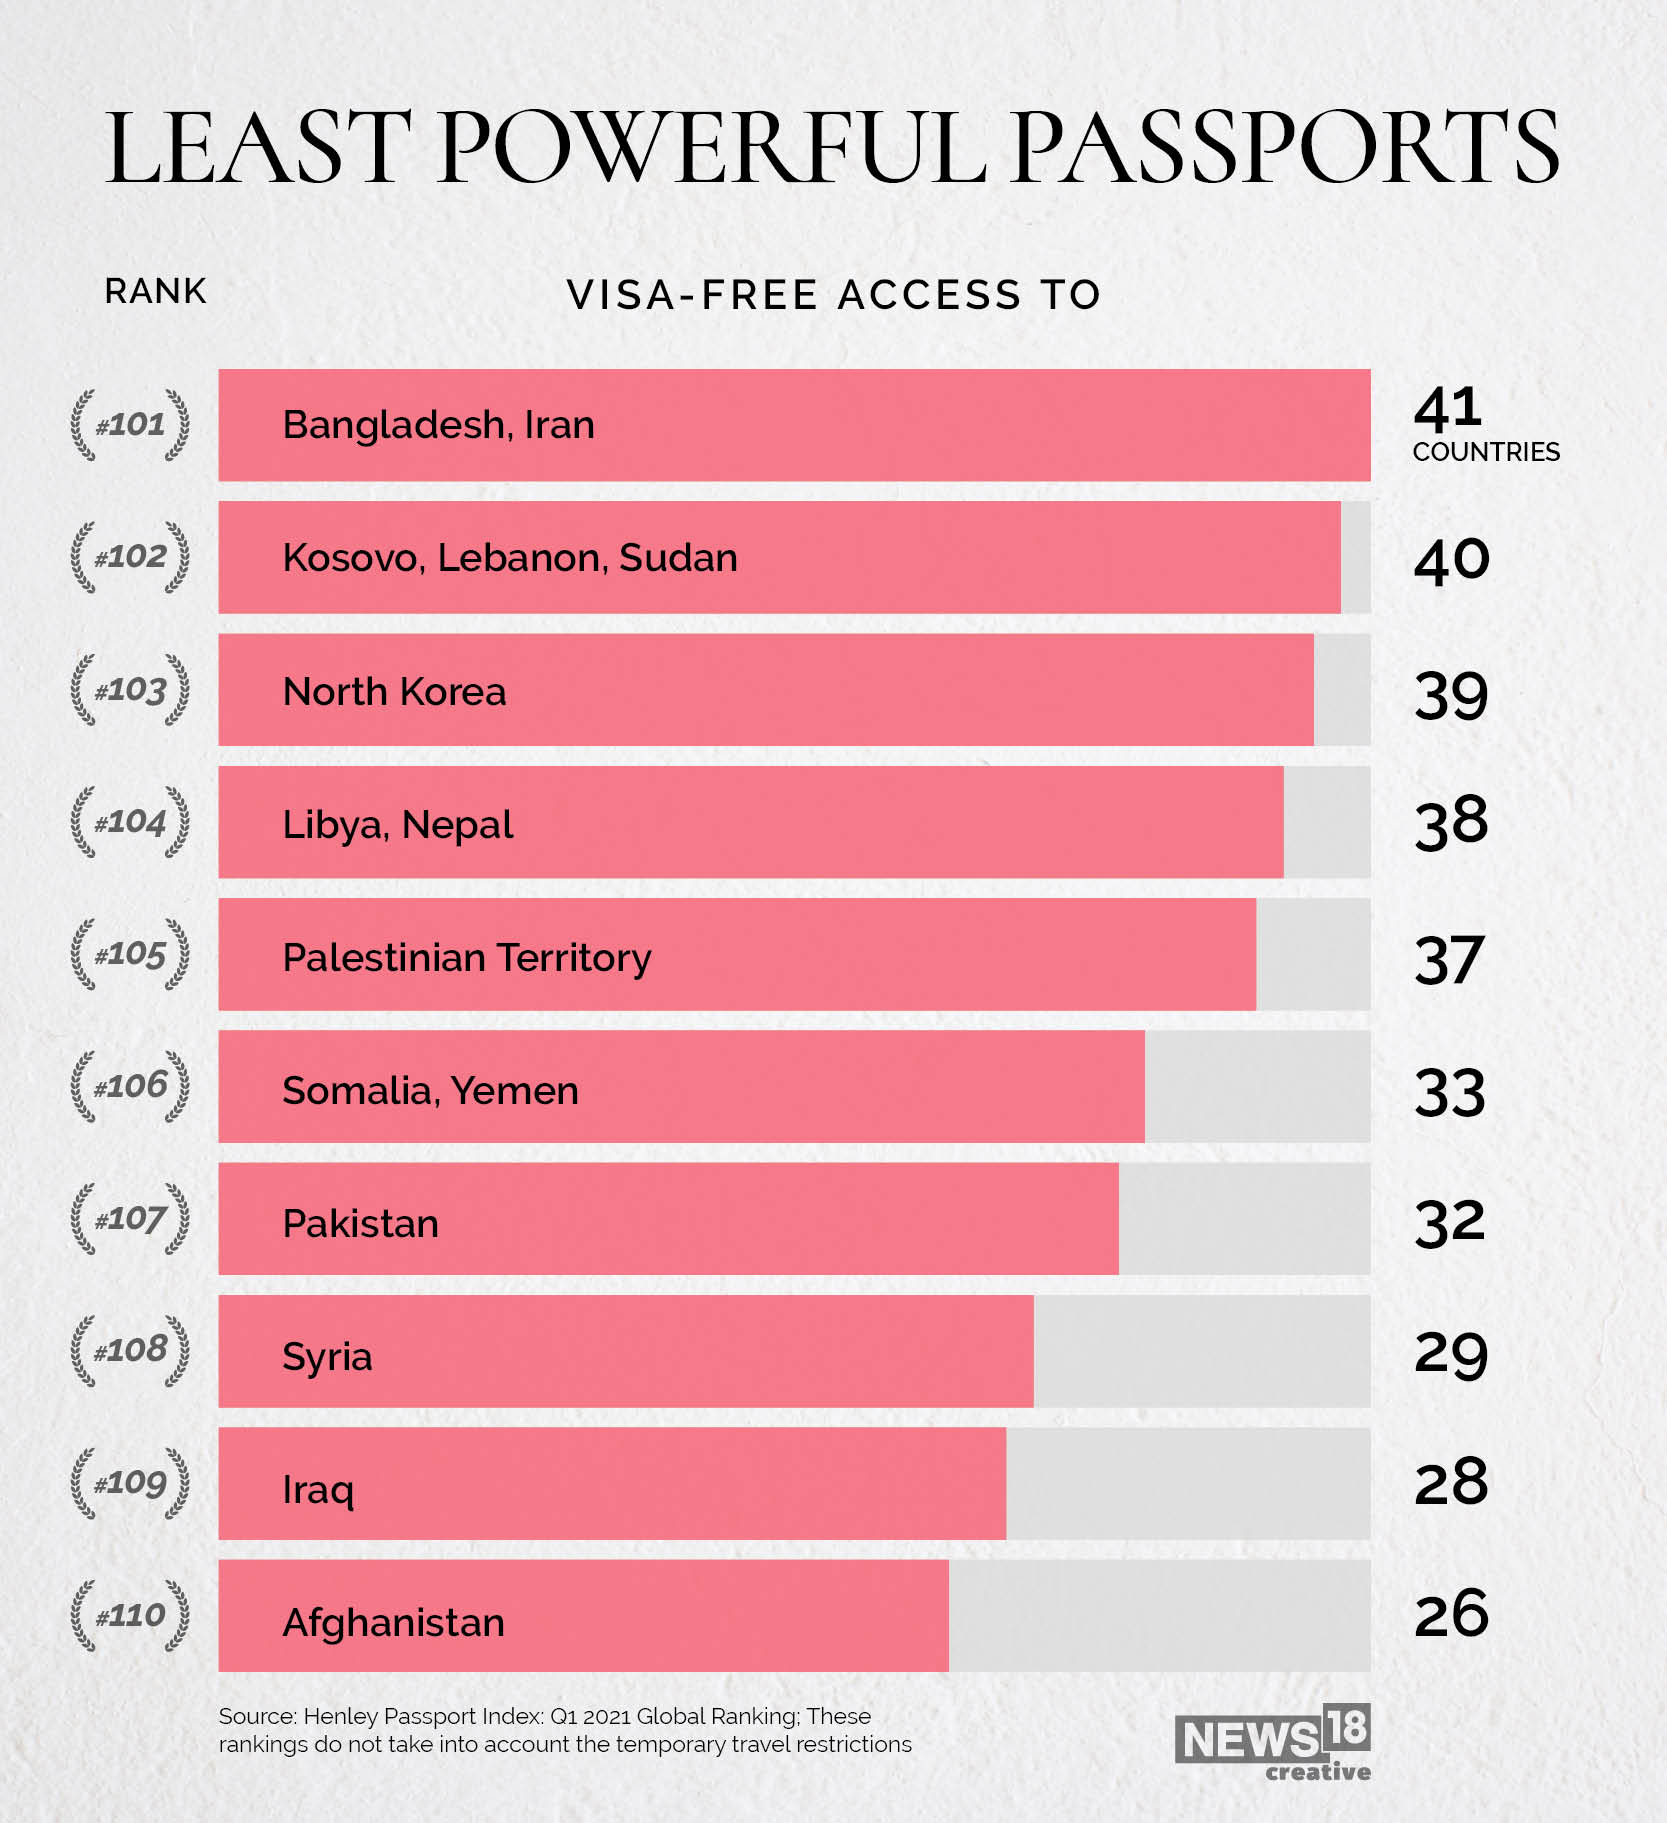 News By Numbers: Most powerful passports in 2021